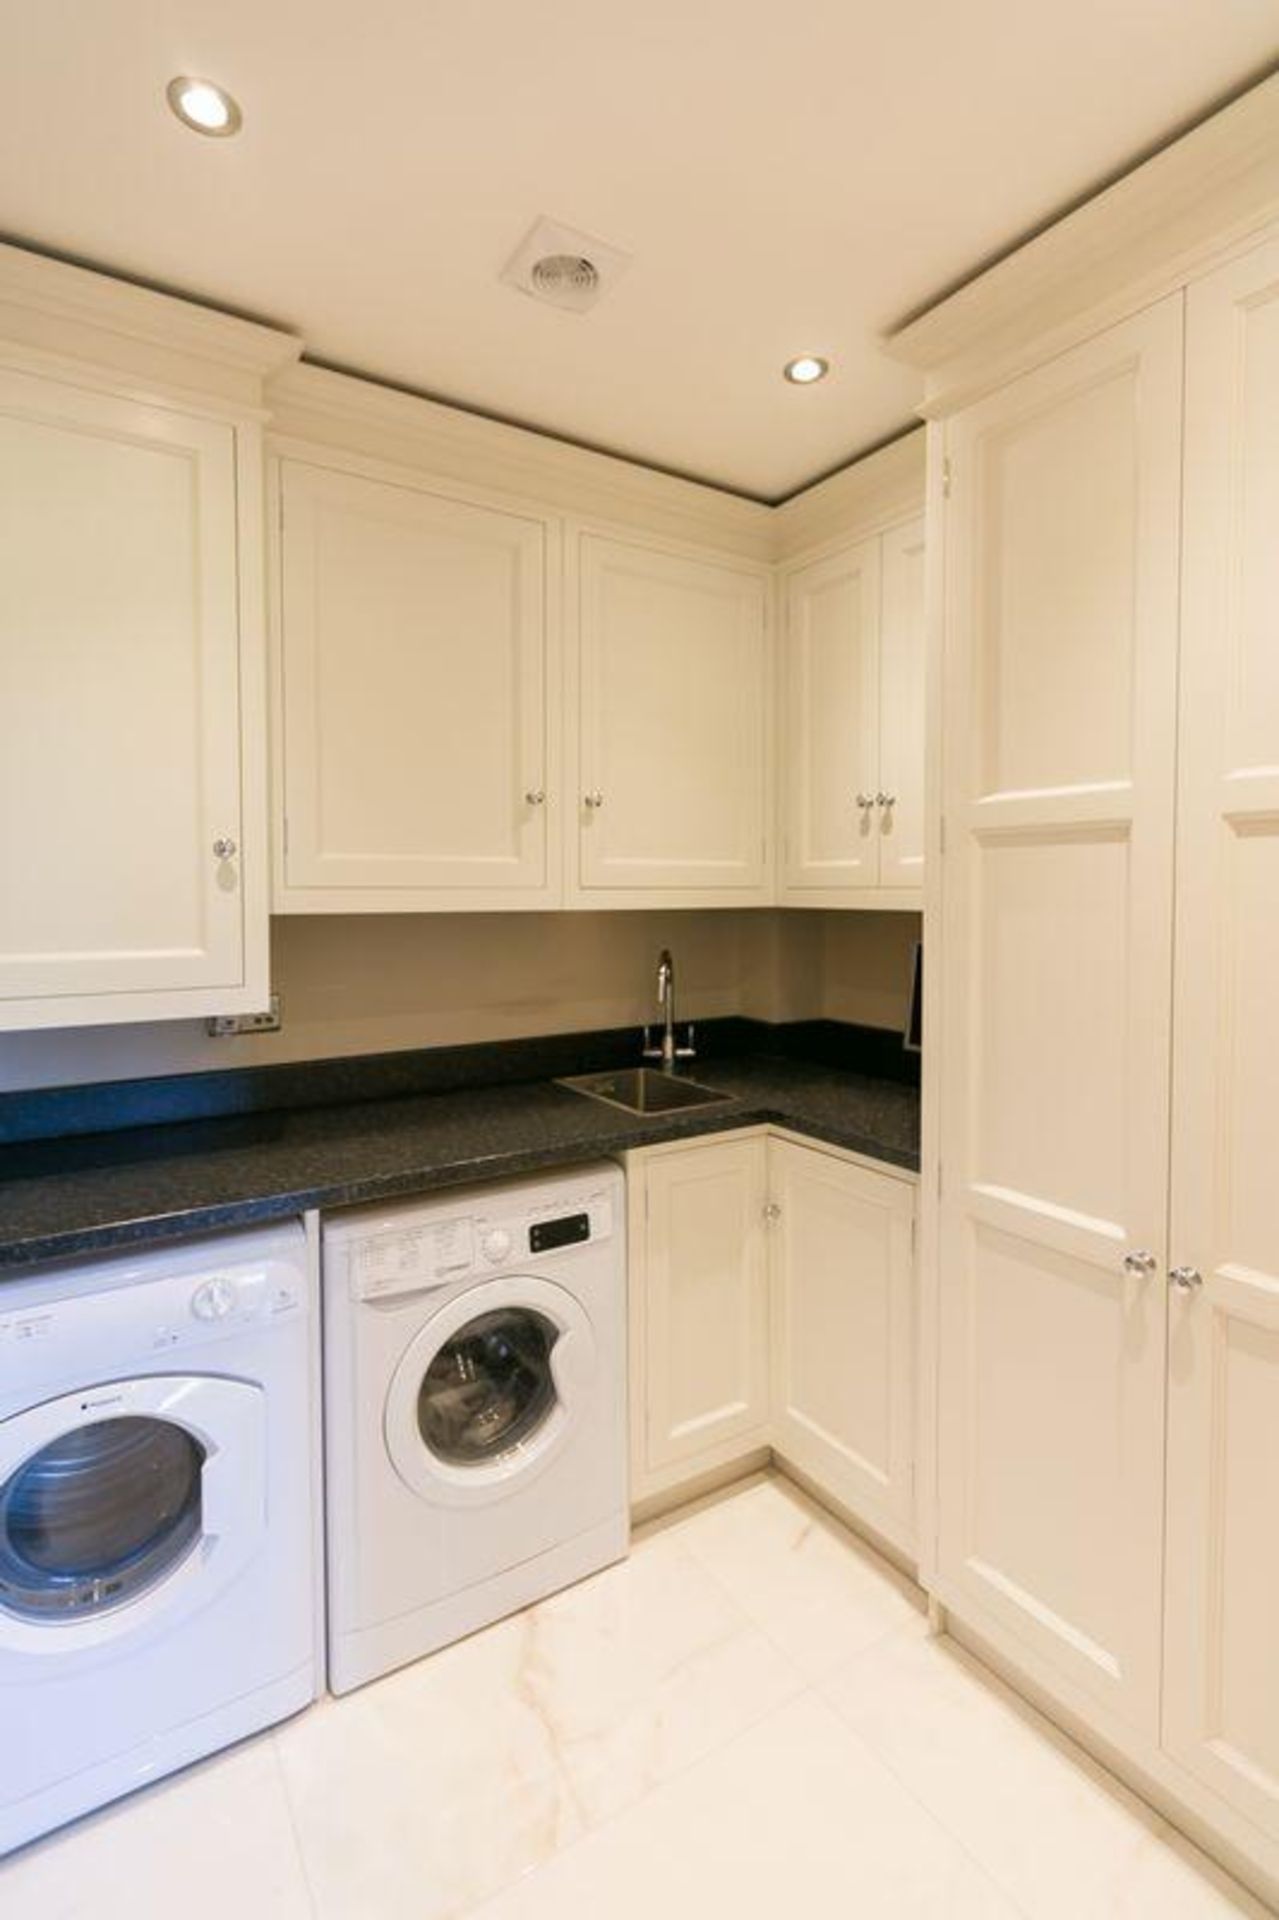 1 x Bespoke Handmade Framed Fitted Kitchen Utility Room By Matthew Marsden Furniture - Features Hand